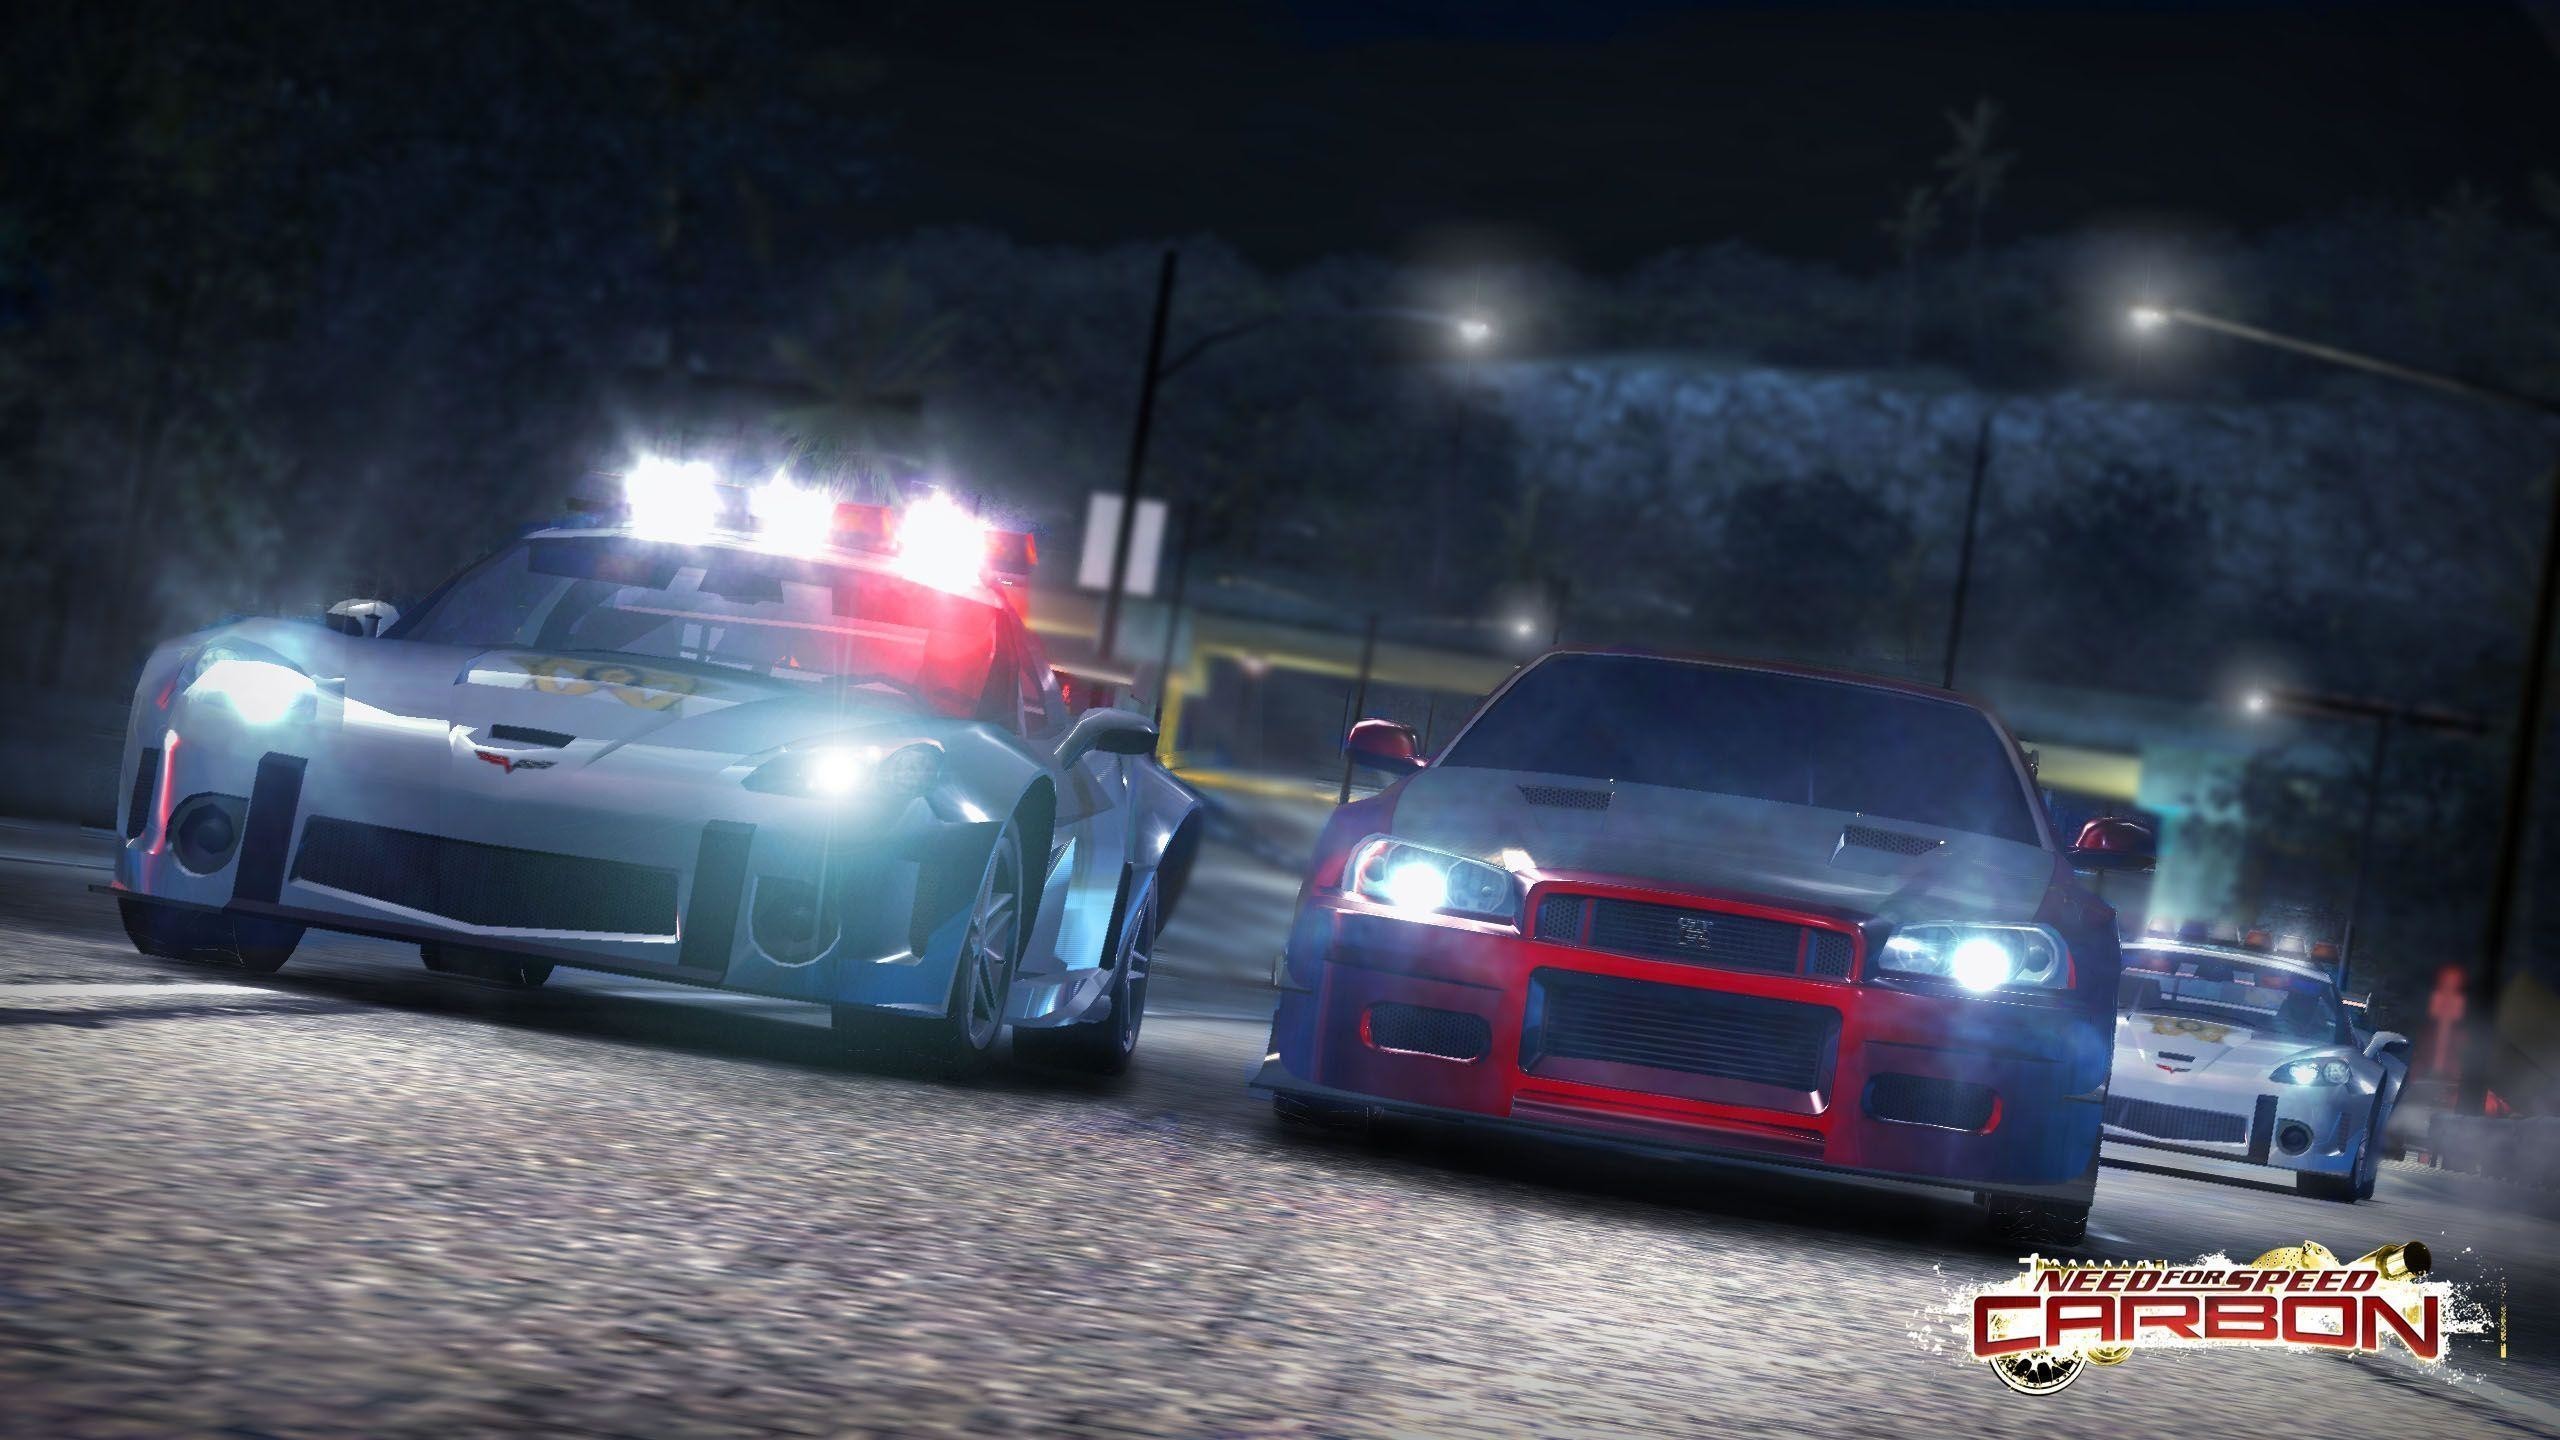 2560x1440  Need for Speed Carbon Wallpaper Cars Saga 640x512PX ~ Wallpaper .